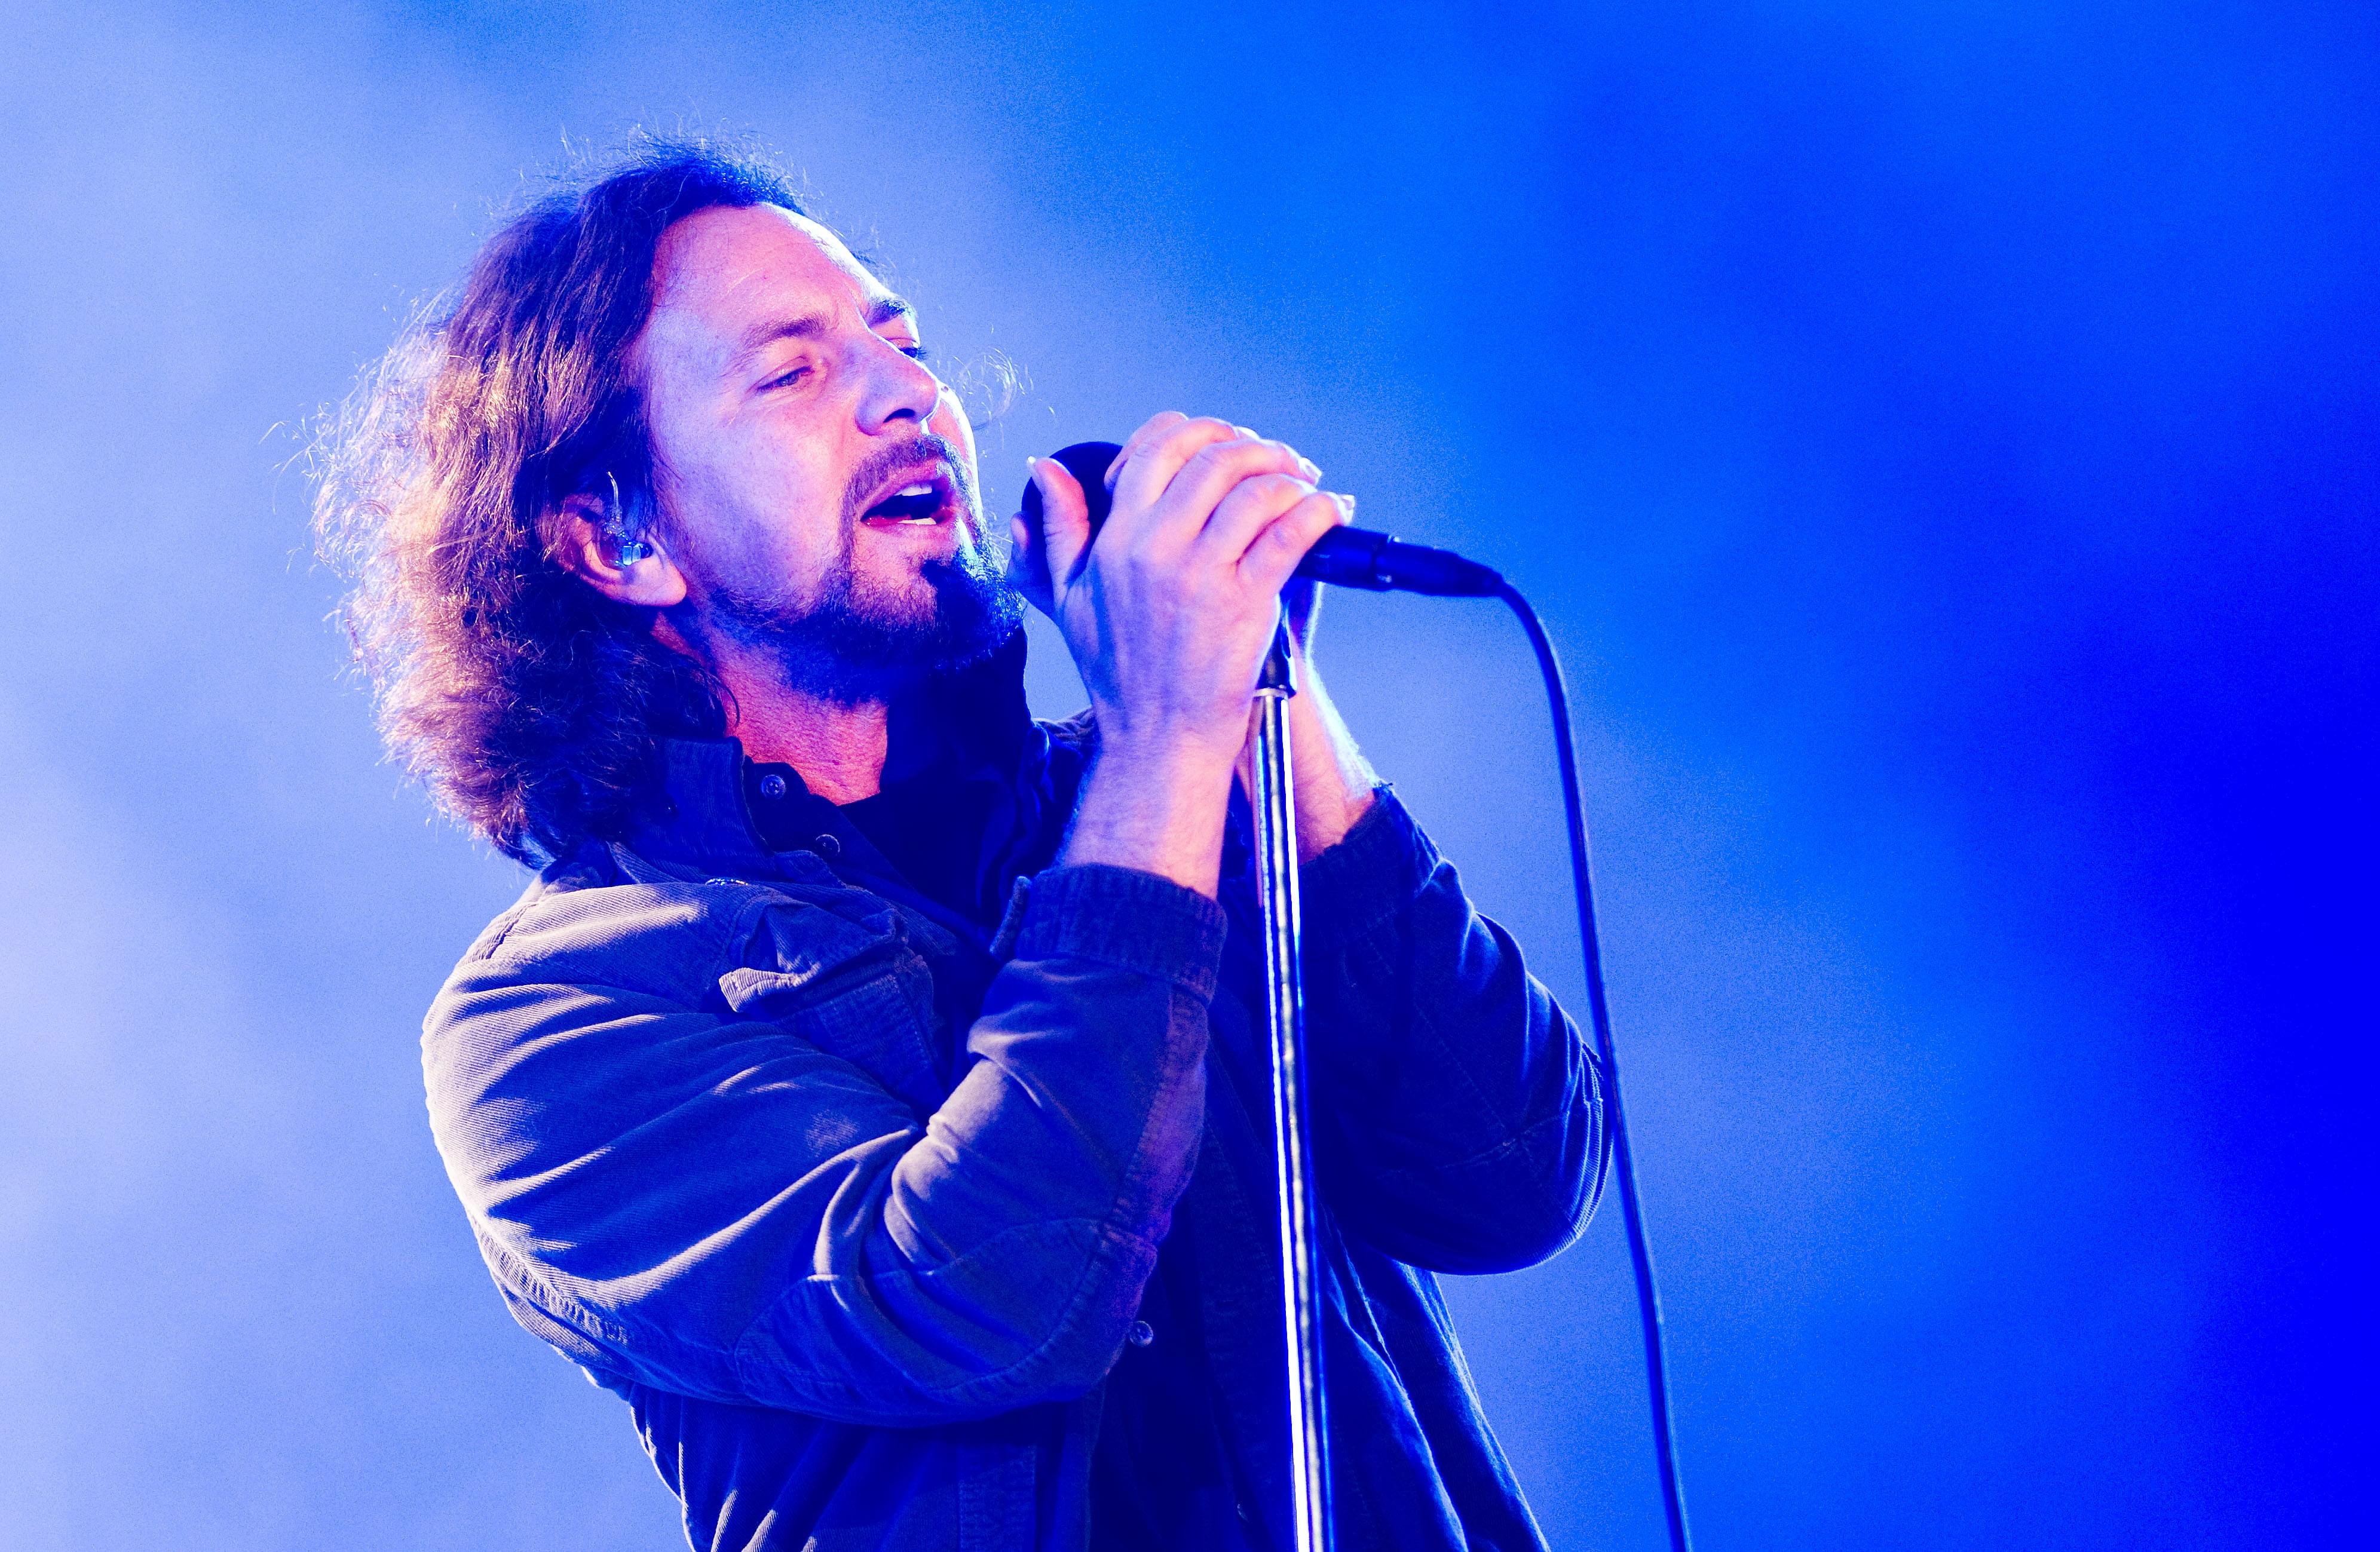 Watch Pearl Jam Perform ‘Dance of the Clairvoyants’ For the First Time [VIDEO]